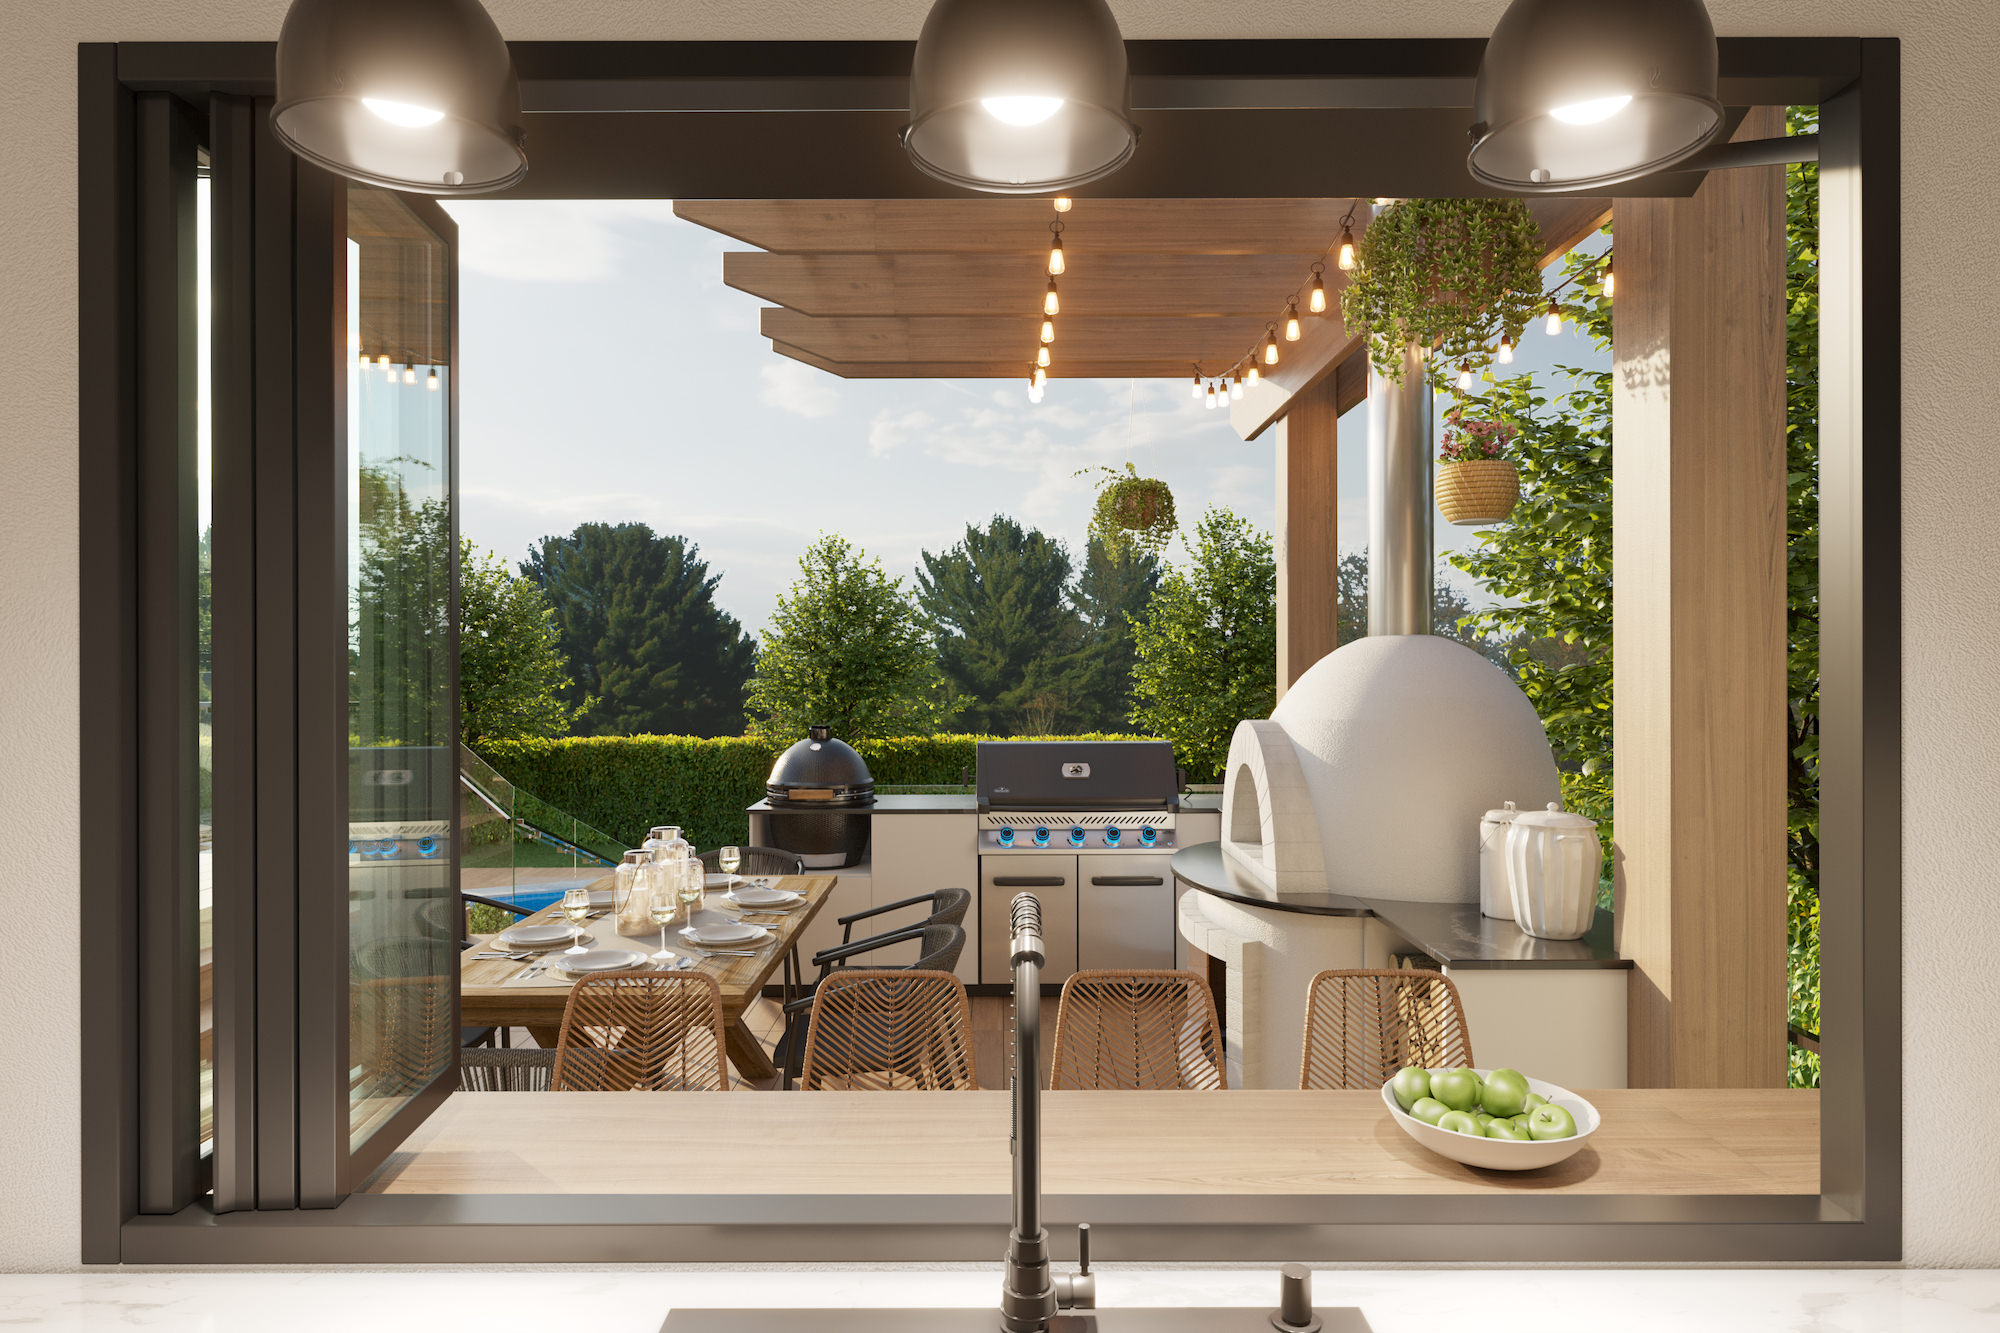 Close-up view of outdoor kitchen with pizza oven, grill and smoker.